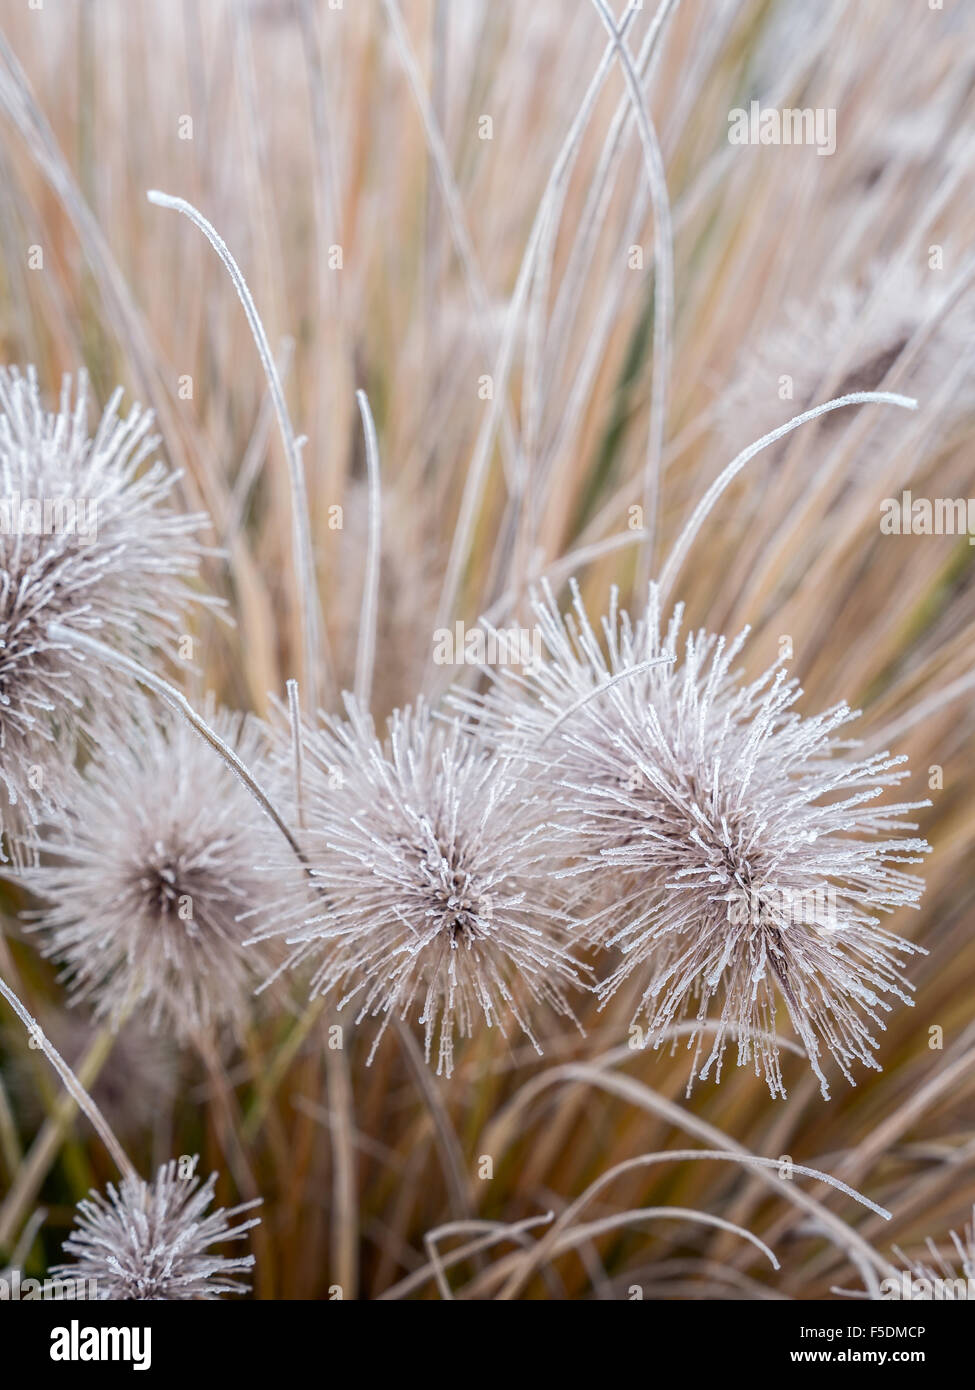 Aristae of Pennisetum alopecuroides grass covered with morning frost Stock Photo